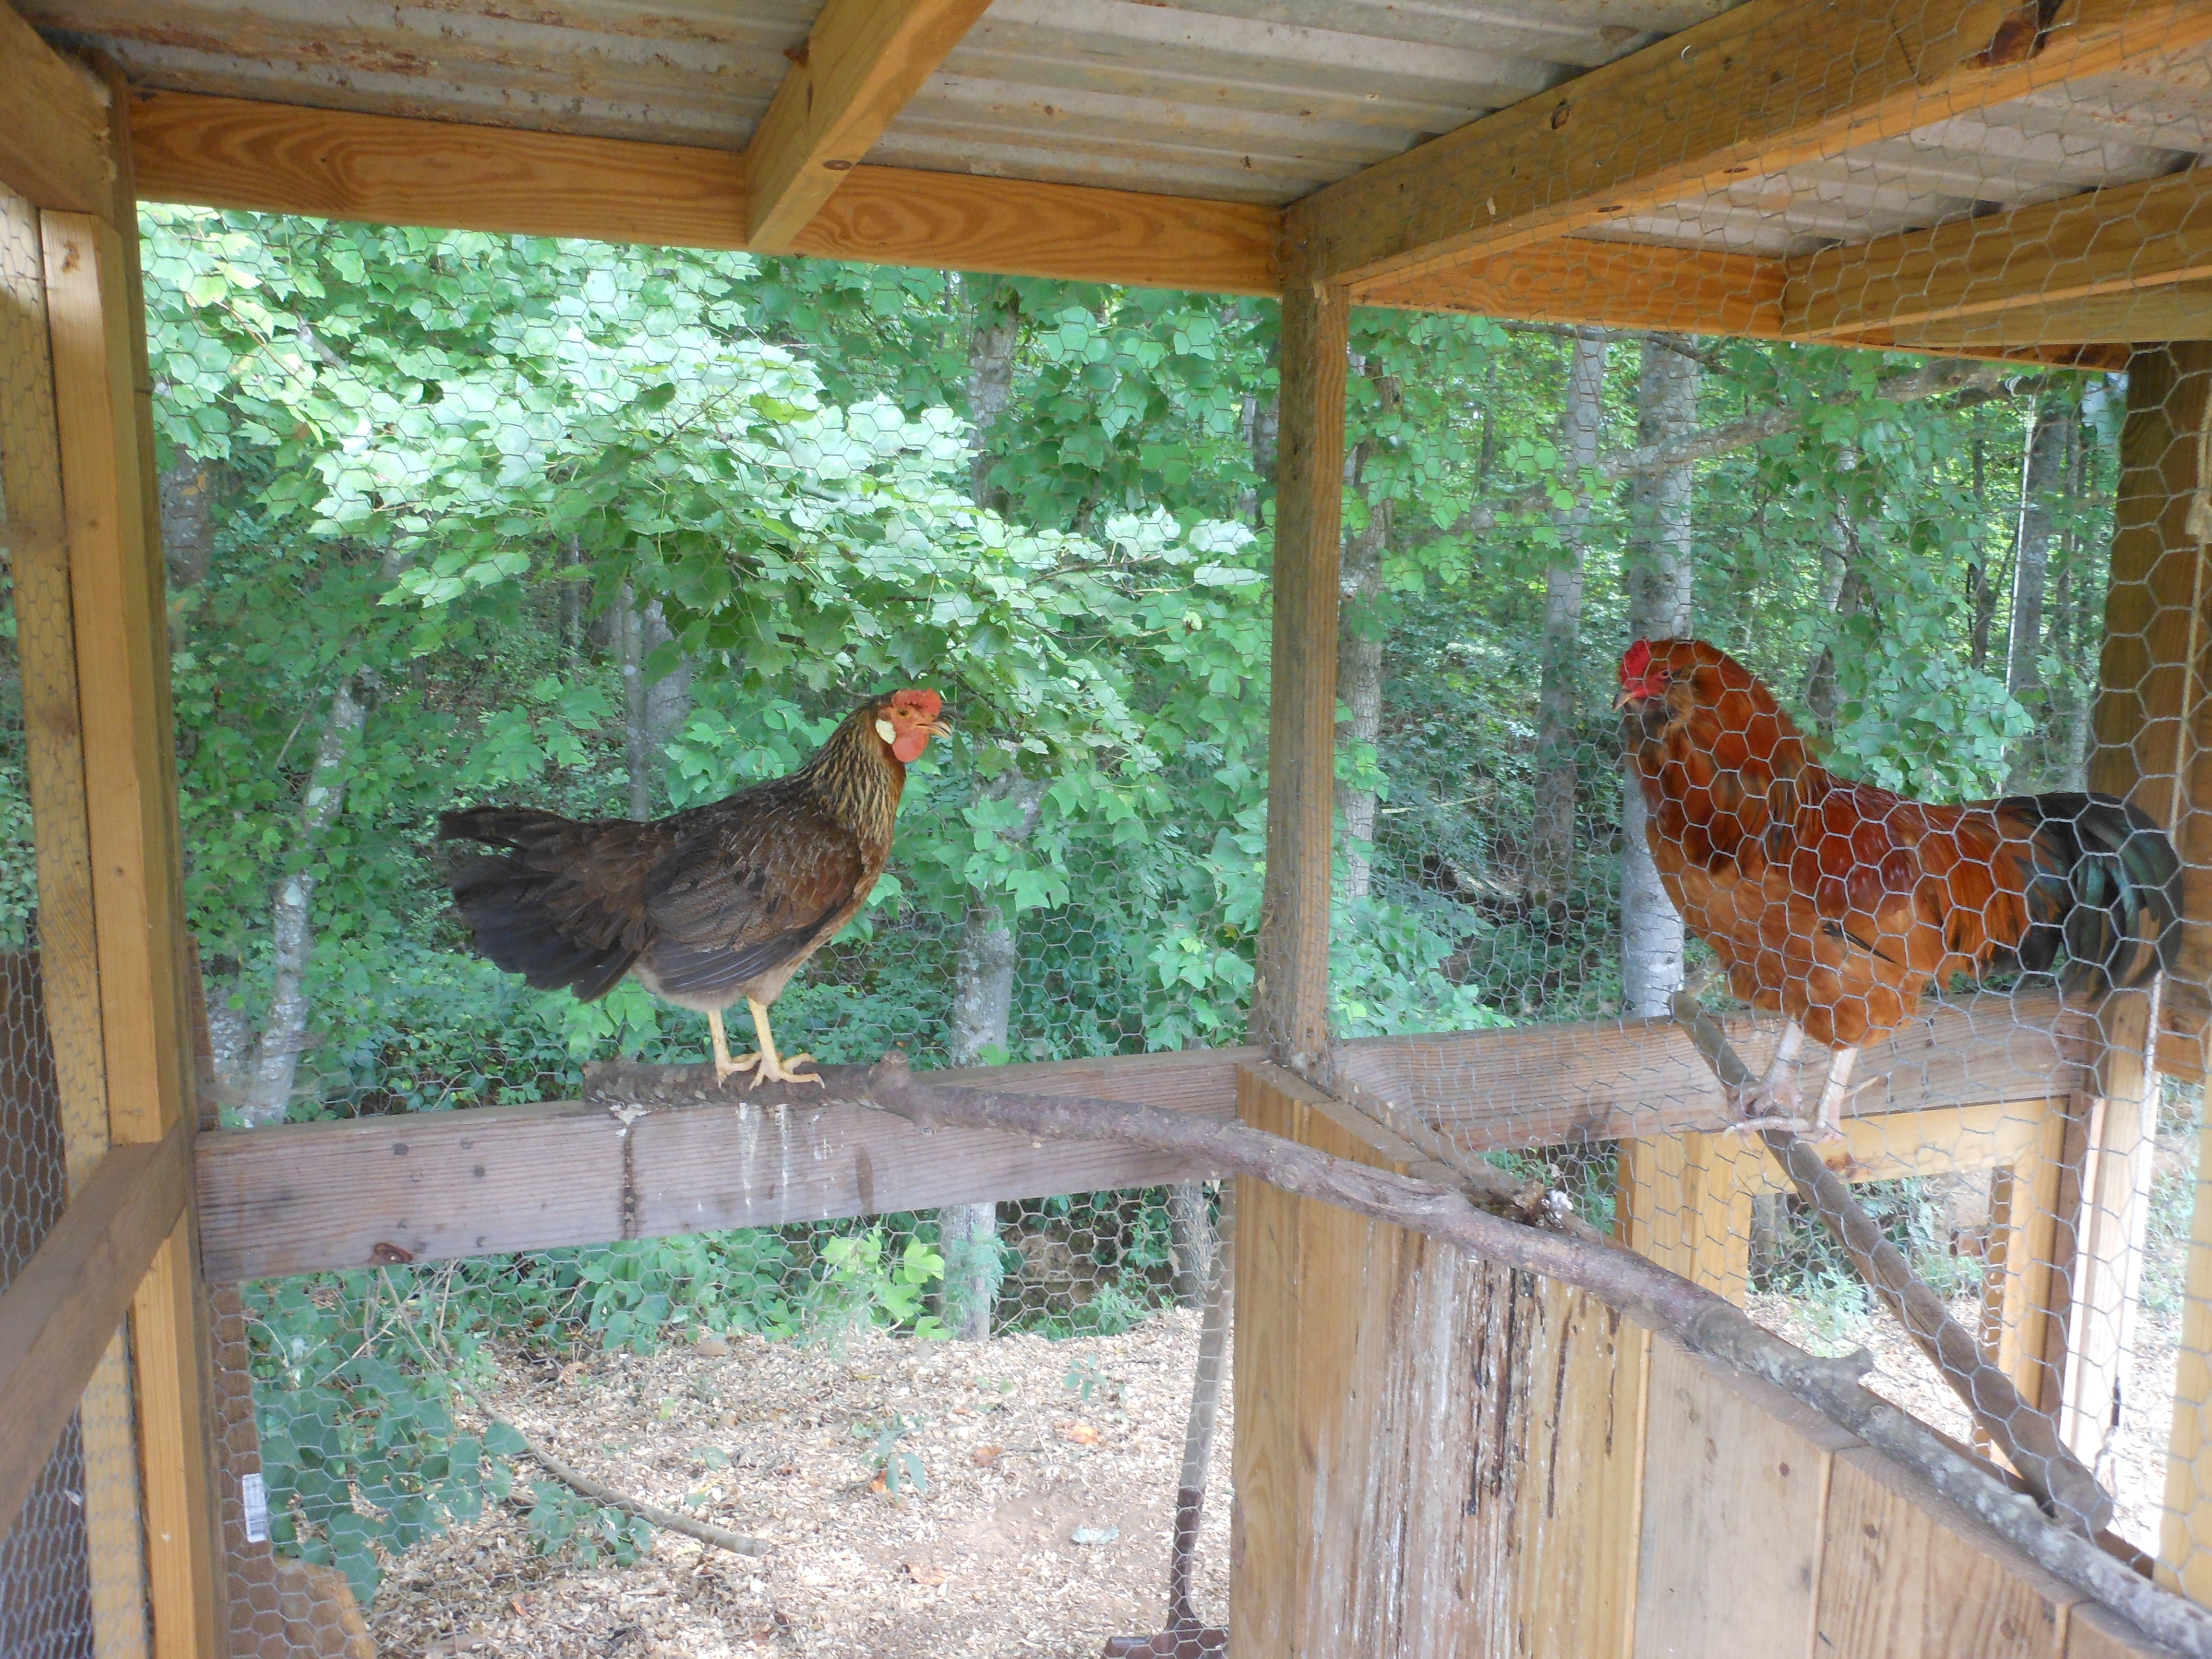 Charlie the Ameraucana rooster and Lizzy the Leghorn hen "chat" through the fence.